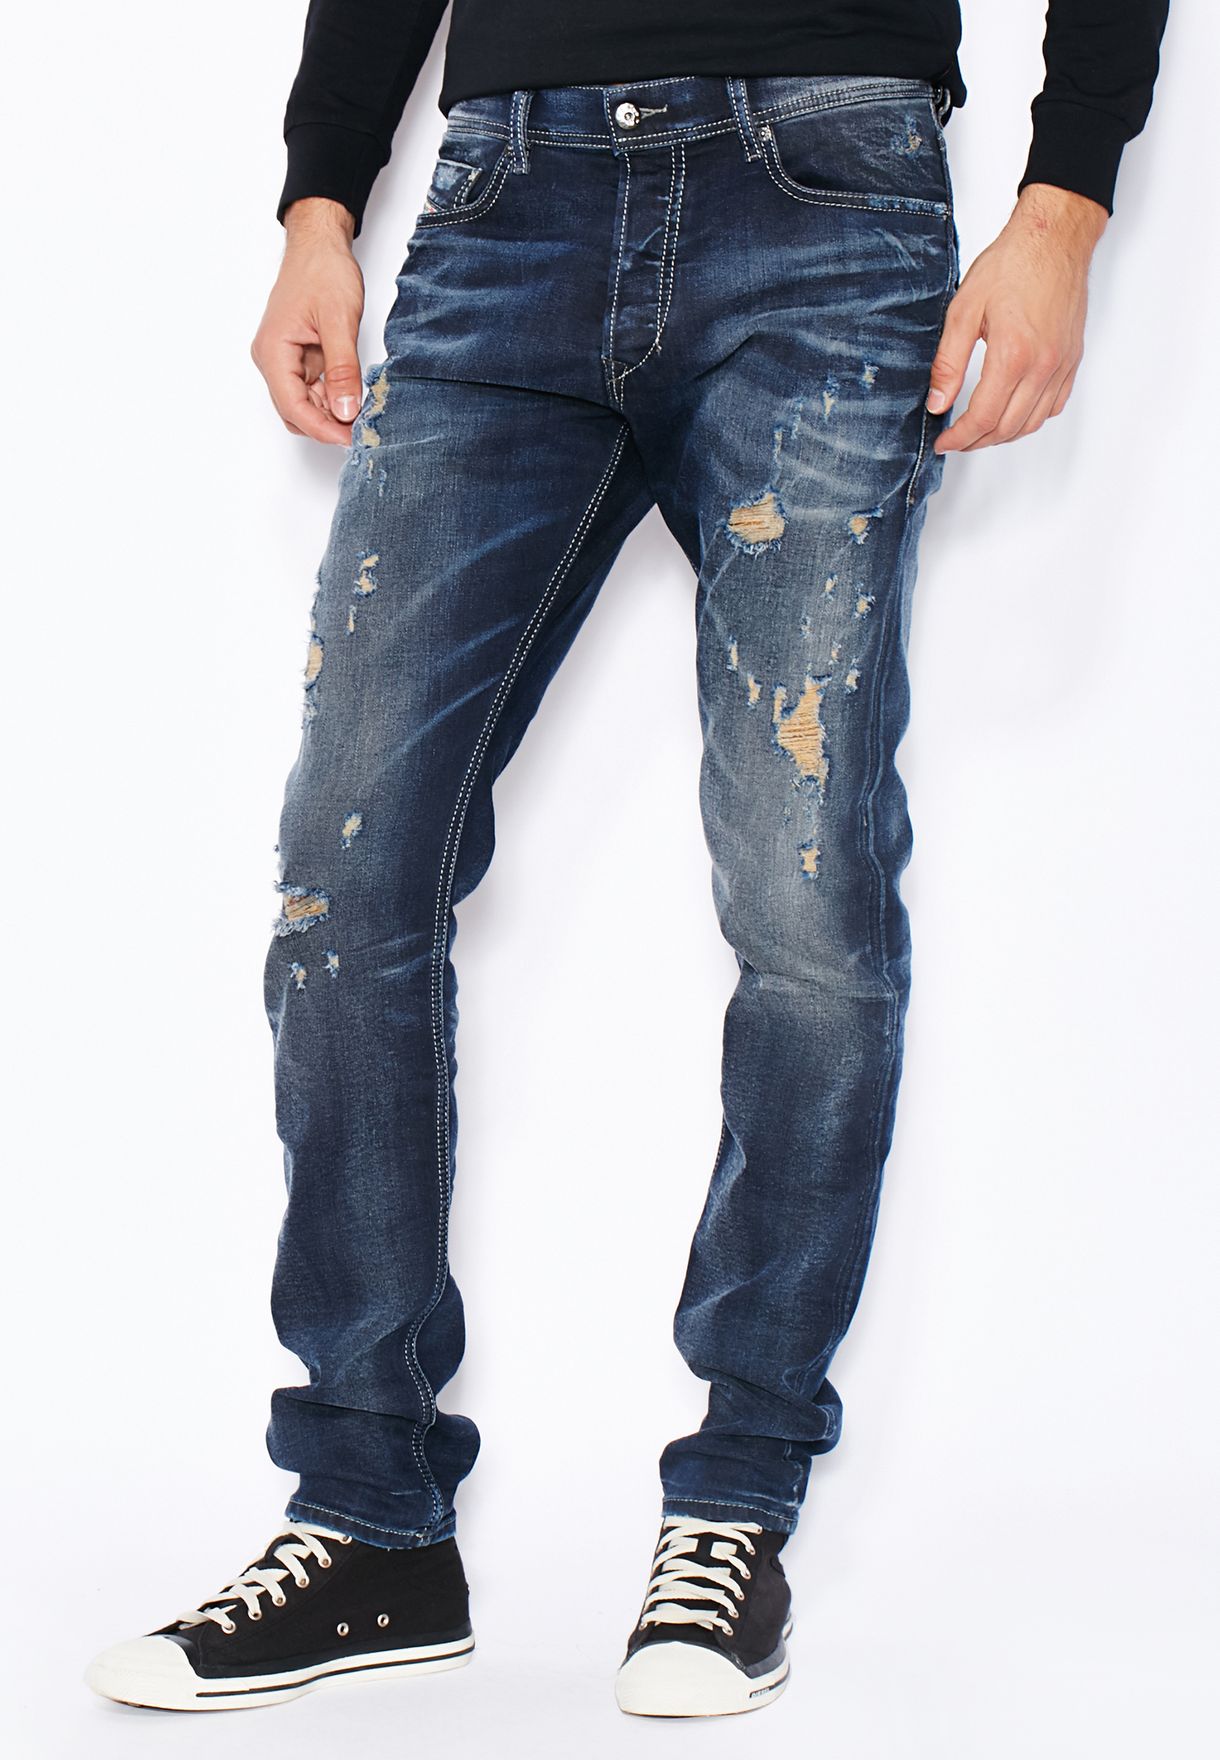 dark wash ripped jeans mens